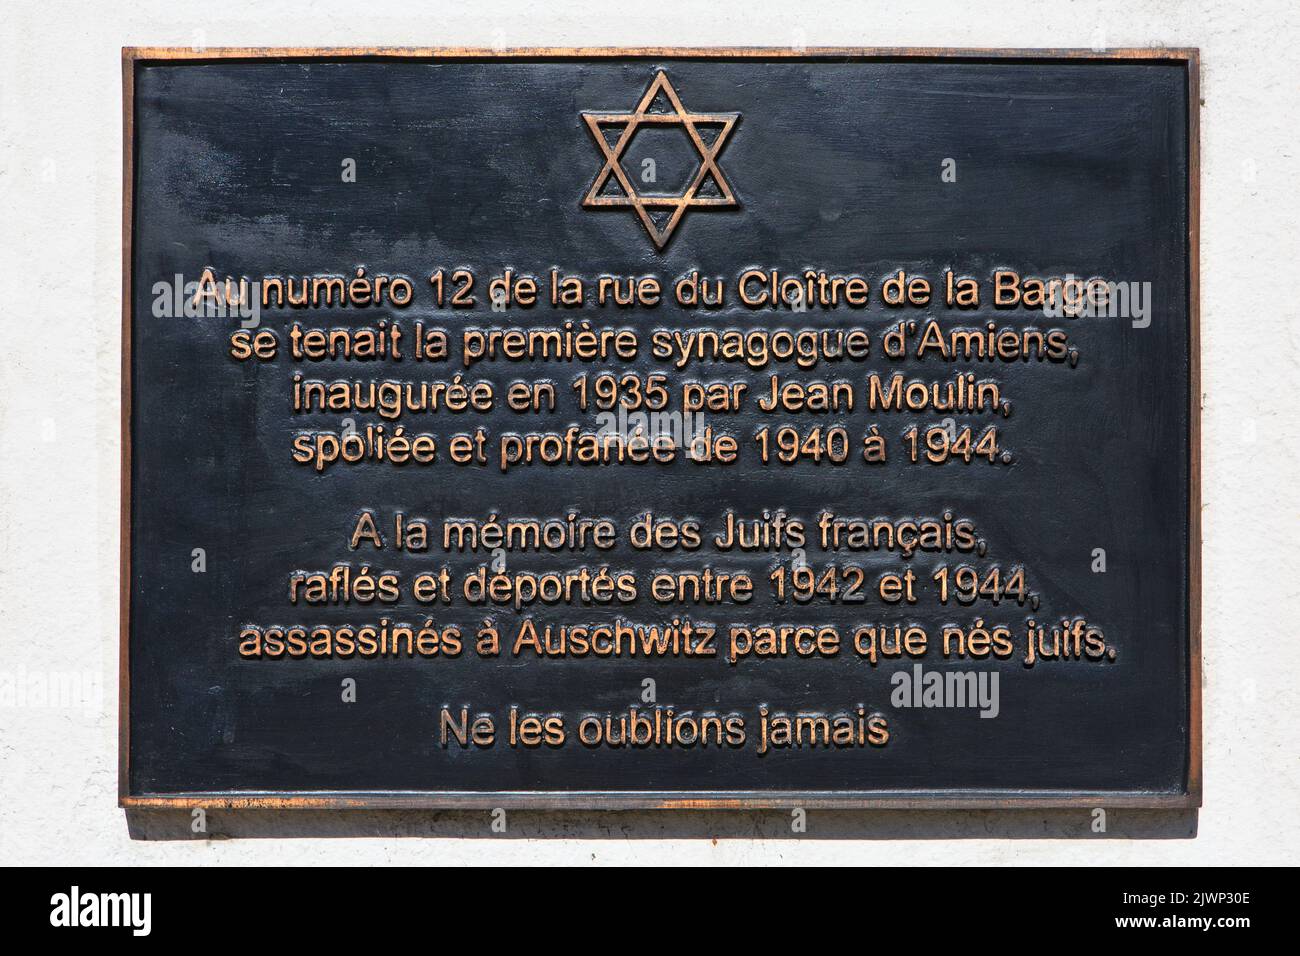 Commemorative plaque in Amiens (Somme), France, for the French Jews who were rounded up, deported and assassinated in Auschwitz during World War II Stock Photo